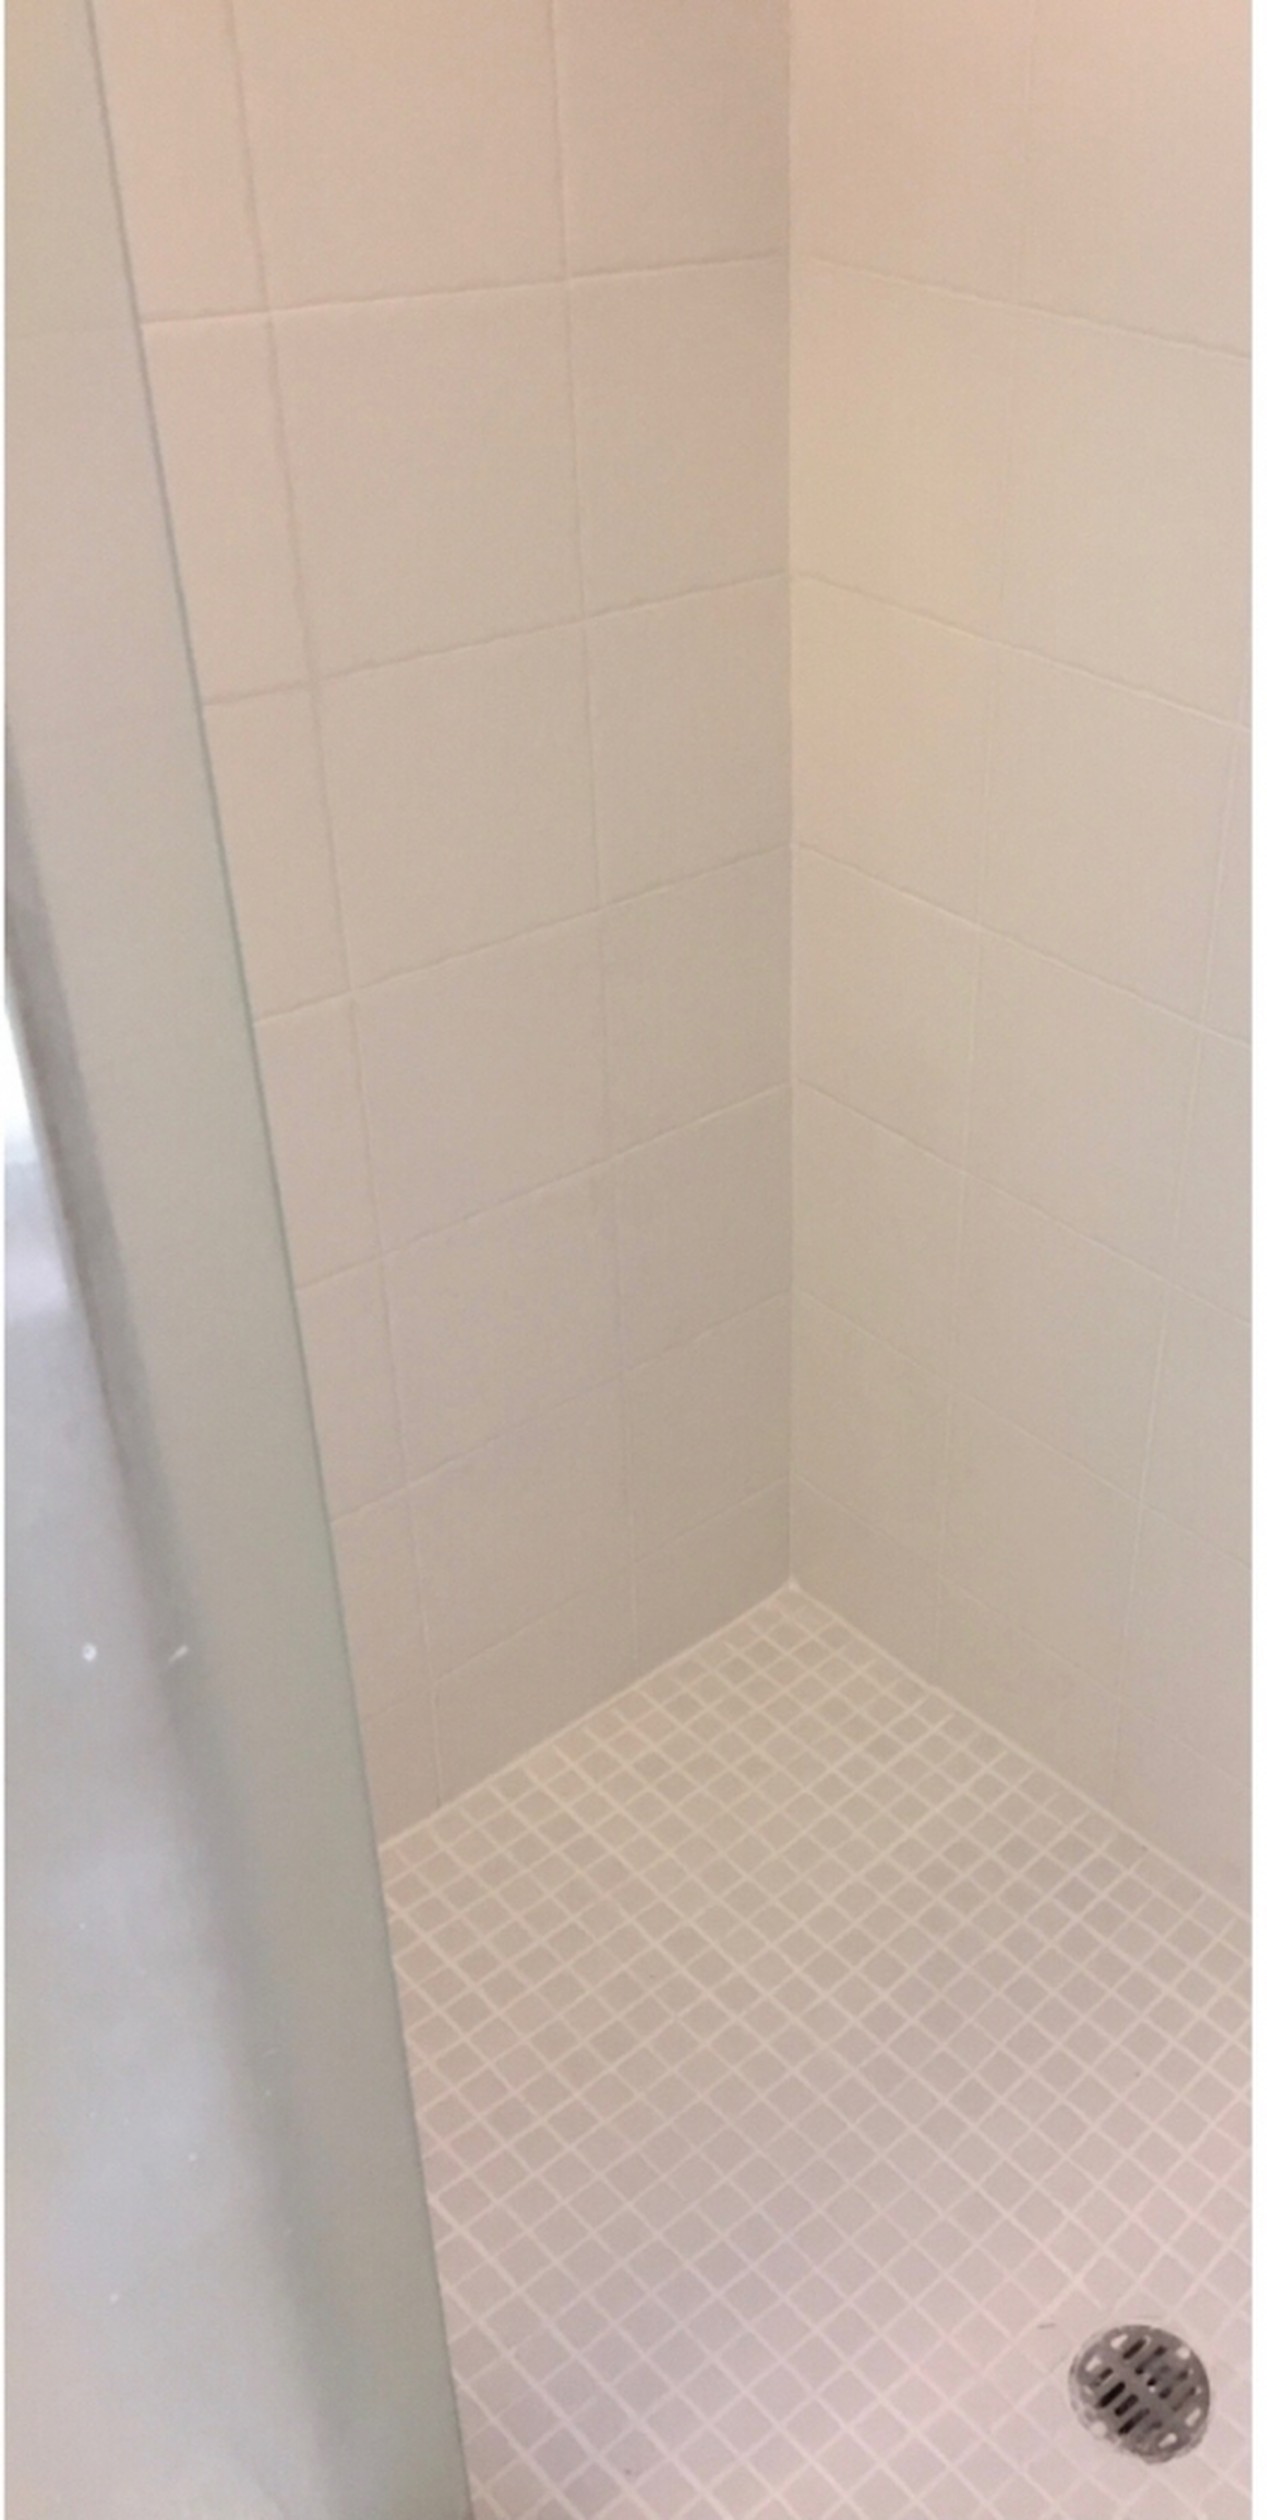 After & Before- Grout Cleaing | the Groutsmith